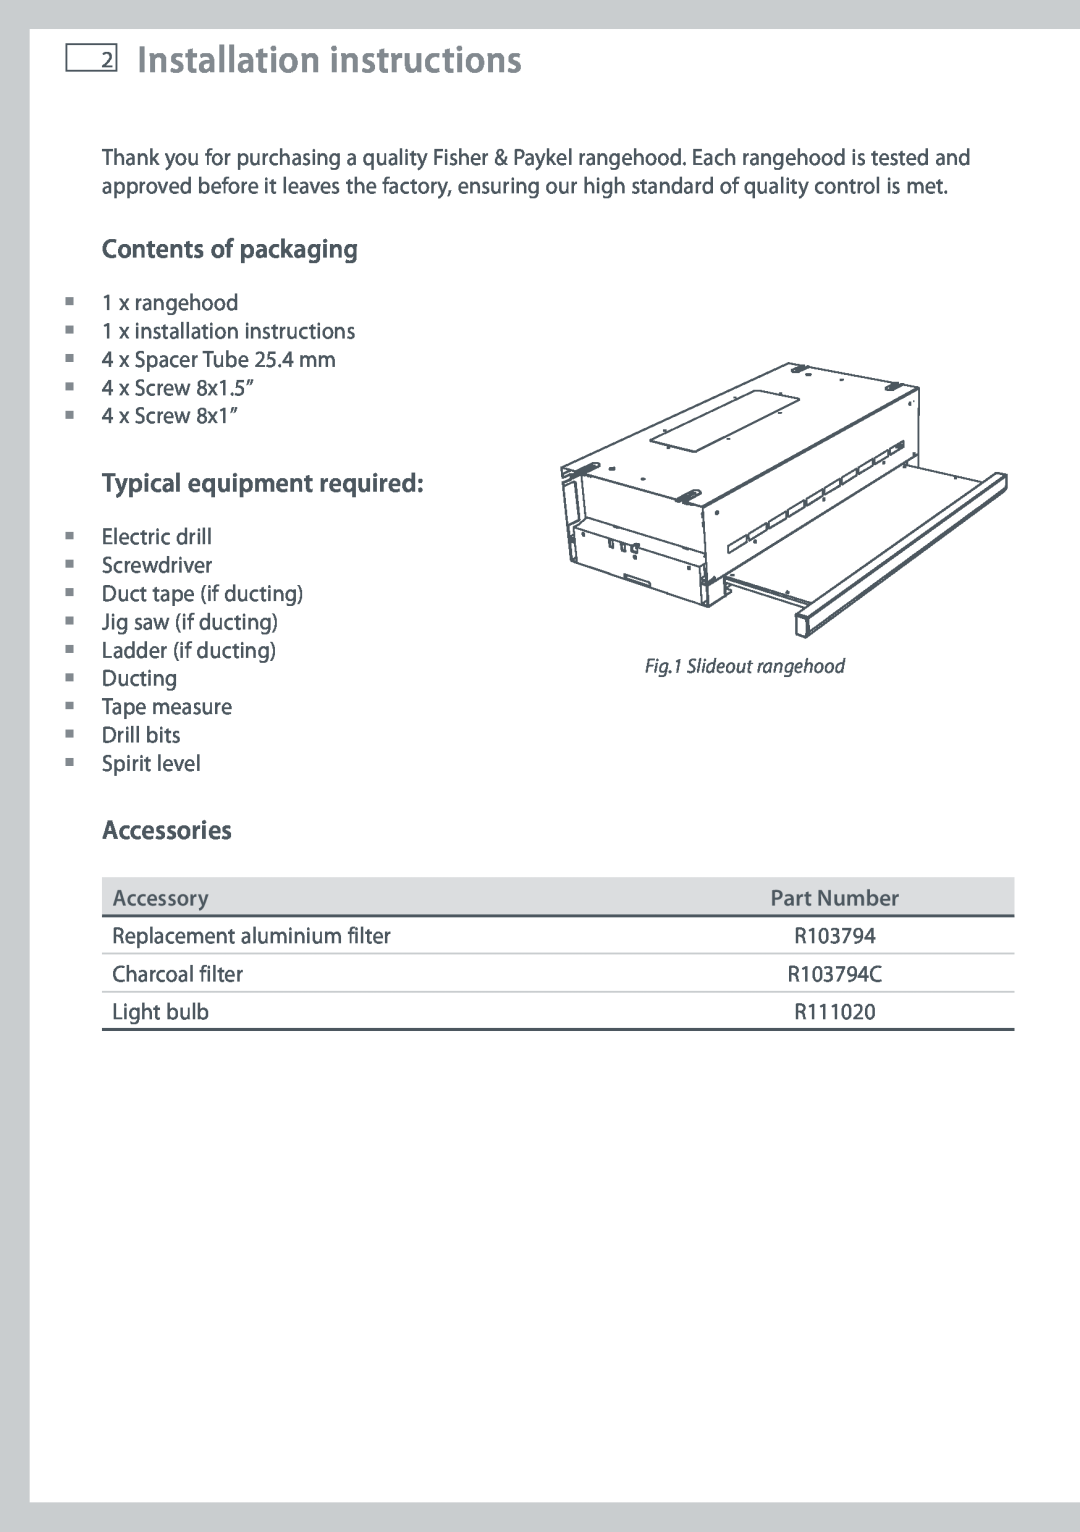 Fisher & Paykel HS60CSX1 Installation instructions, Contents of packaging, Typical equipment required, Accessories 